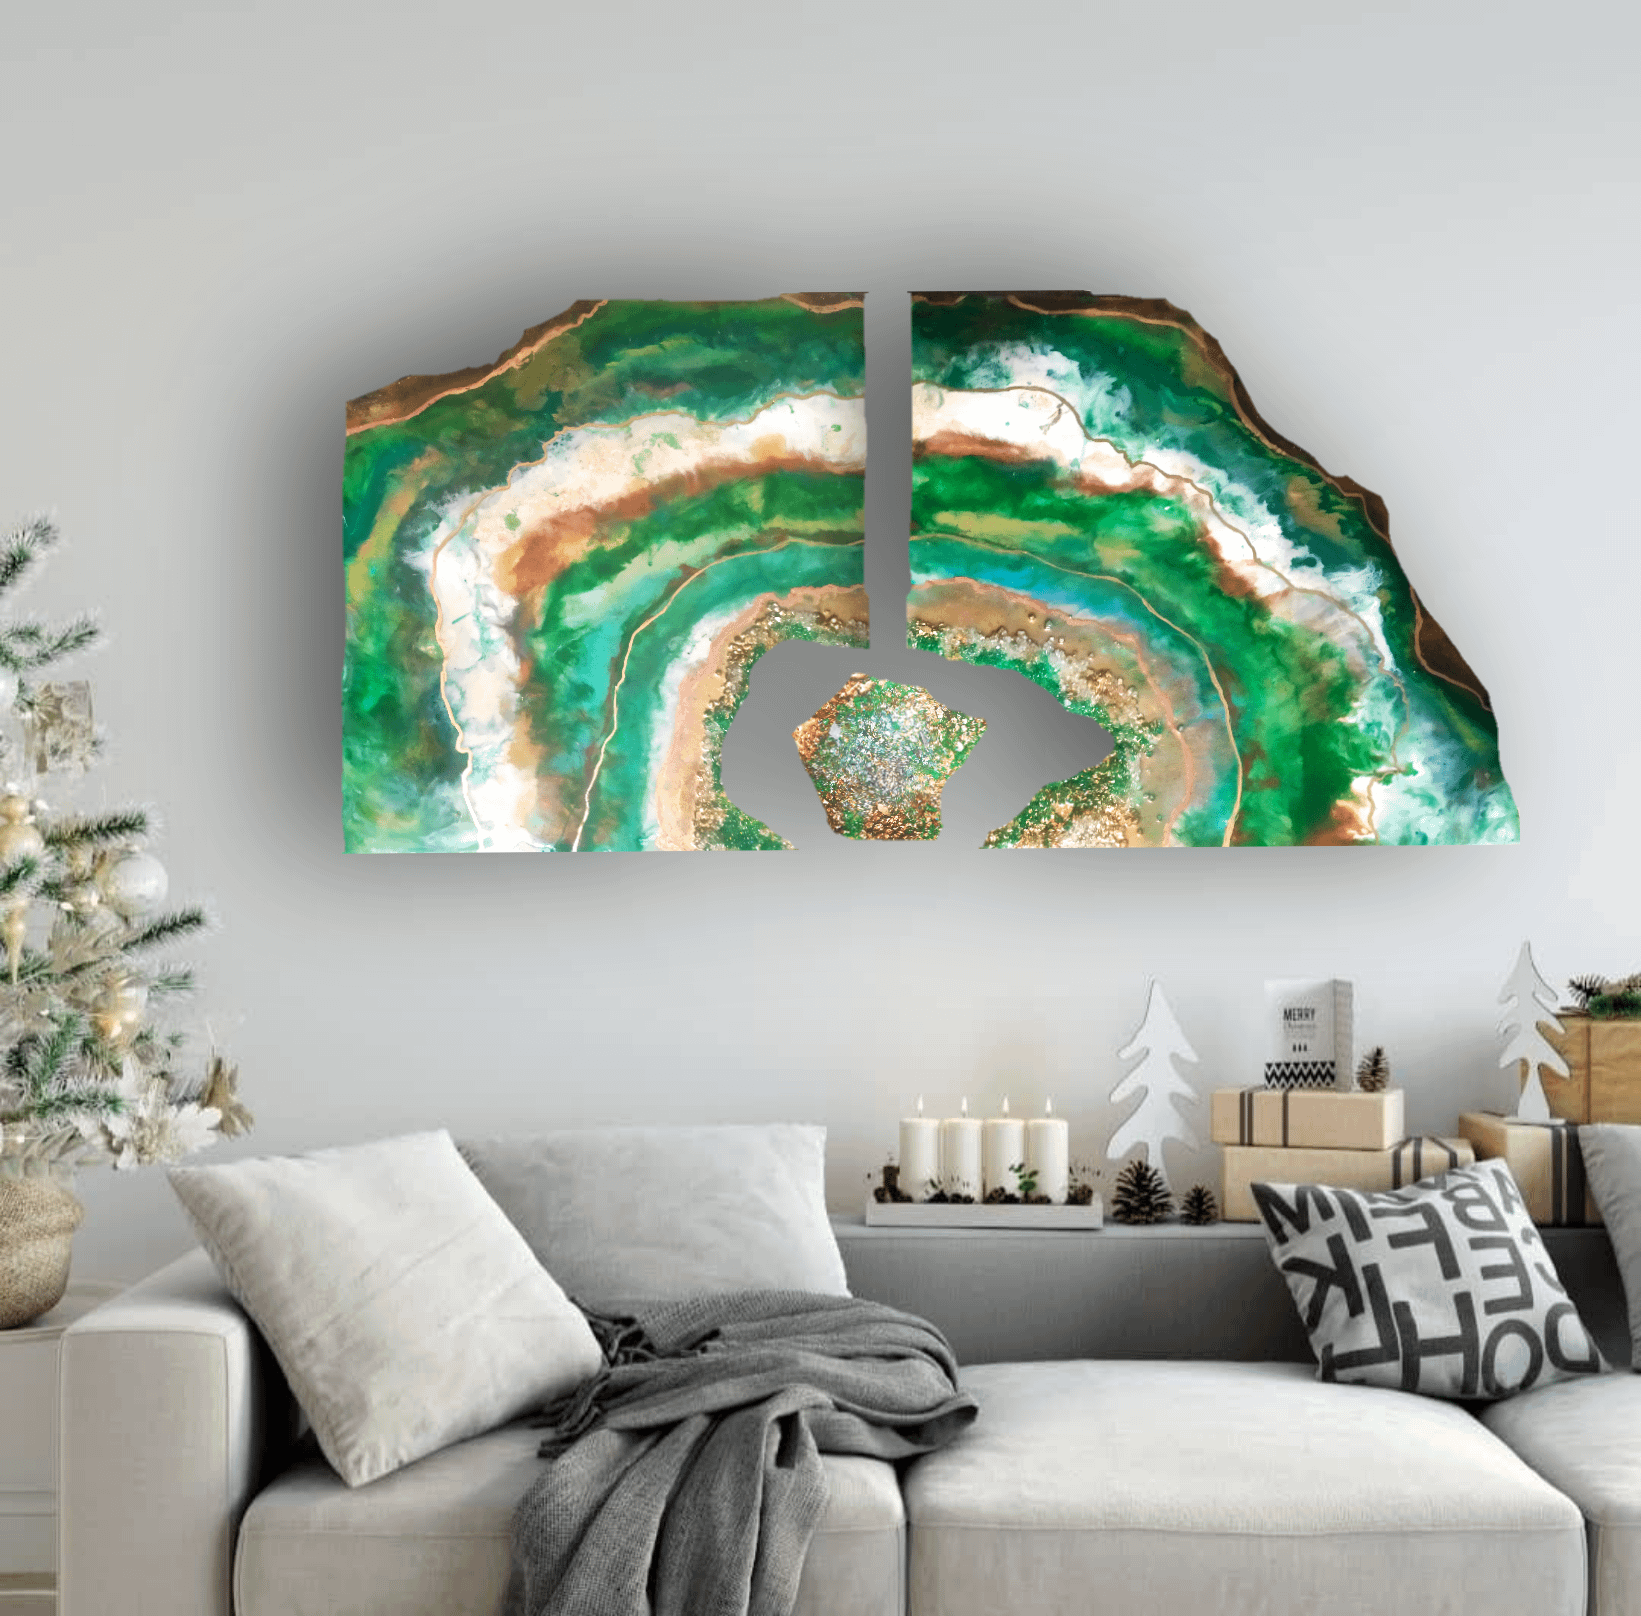 Green Geode Resin Painting For Sale - Resin Art For Sale